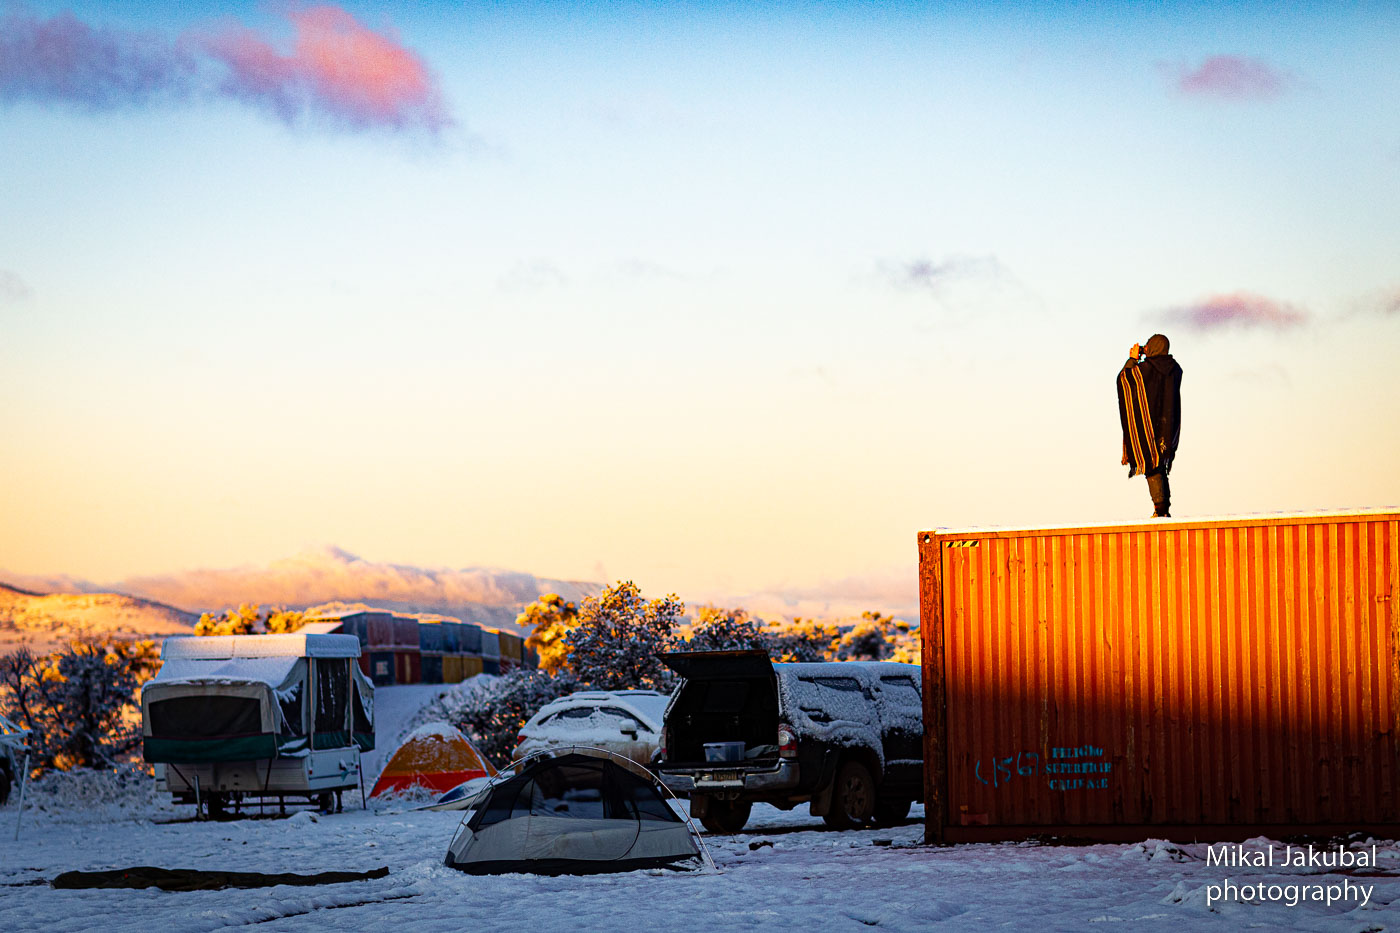 A protester with binoculars stands atop a sunlit shipping container at dawn. In the shadow below is a collection of snow covered tents and vehicles.